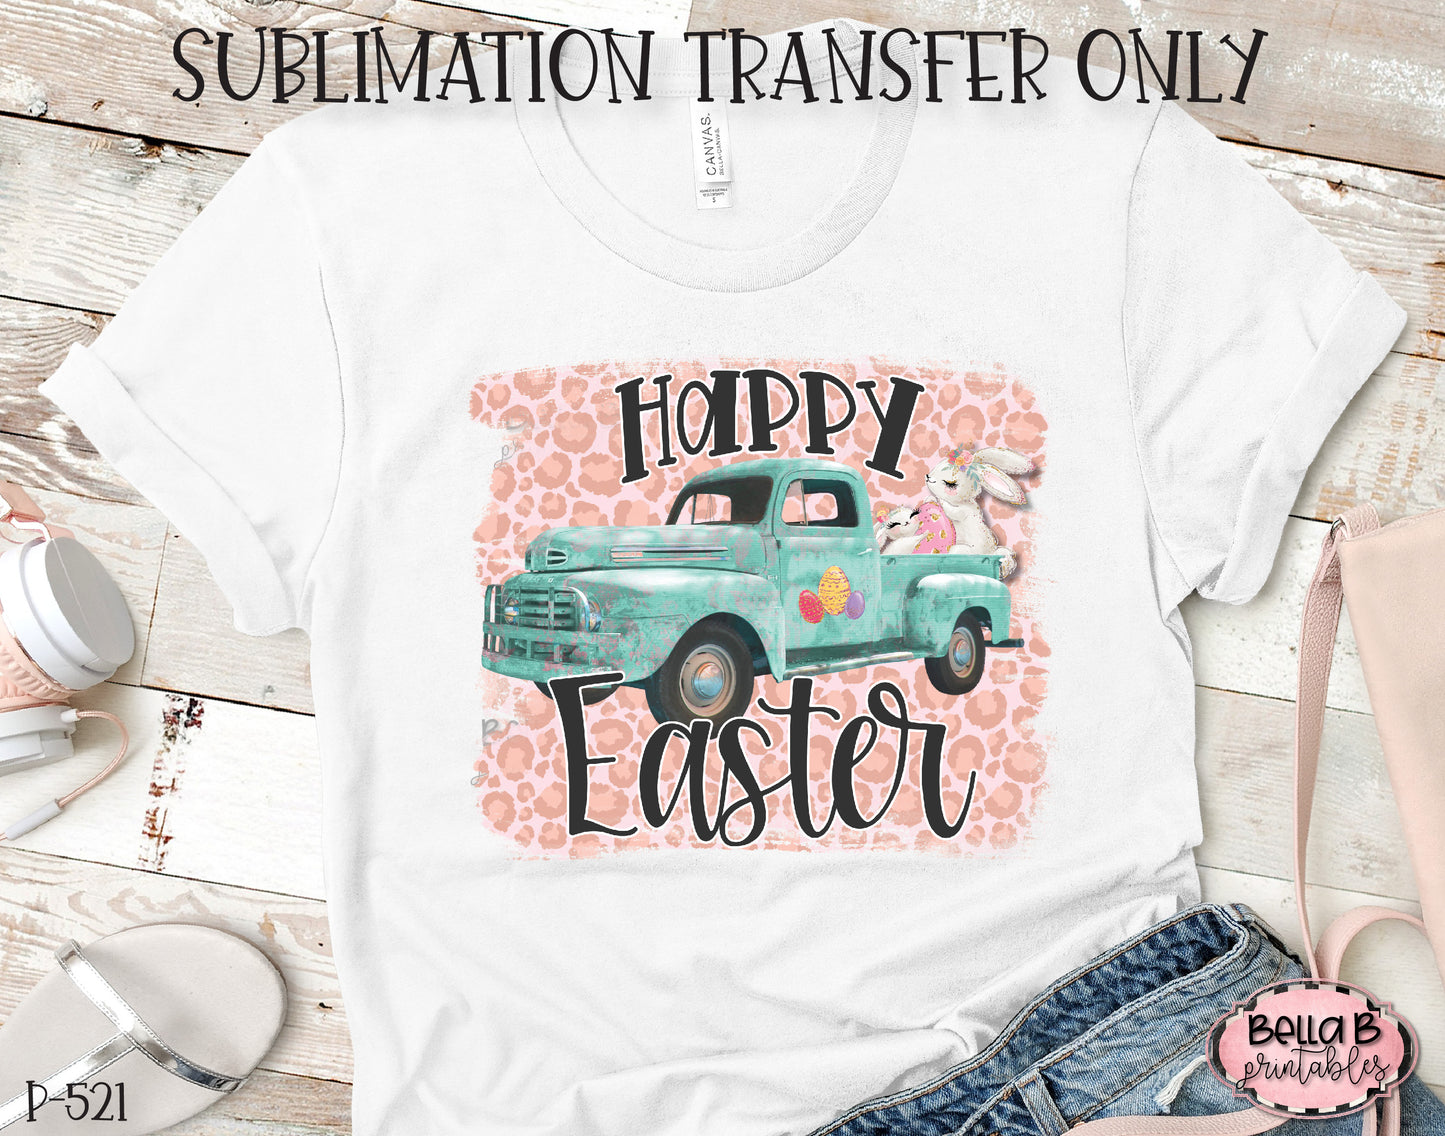 Easter Truck Sublimation Transfer, Happy Easter, Ready To Press, Heat Press Transfer, Sublimation Print